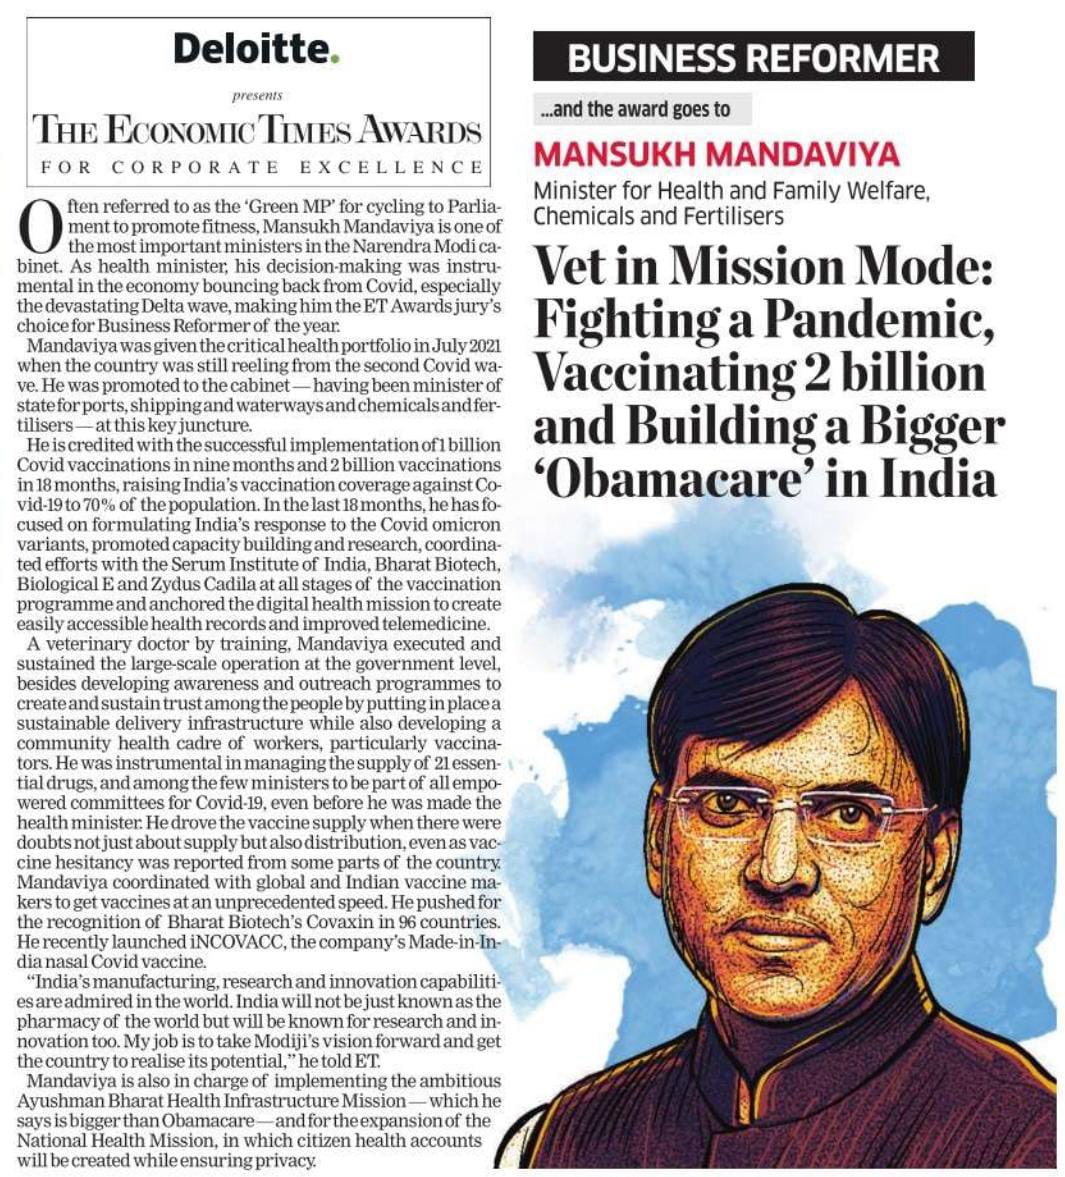 Congrats to Union Health Minister Sri @mansukhmandviya Ji on being conferred with Economic Times Business Reformer of the Year Award.

This is a testament to his contribution in managing #LargestVaccinationDrive, Ayushman Bharat & reforming healthcare under Sri @narendramodi Ji.